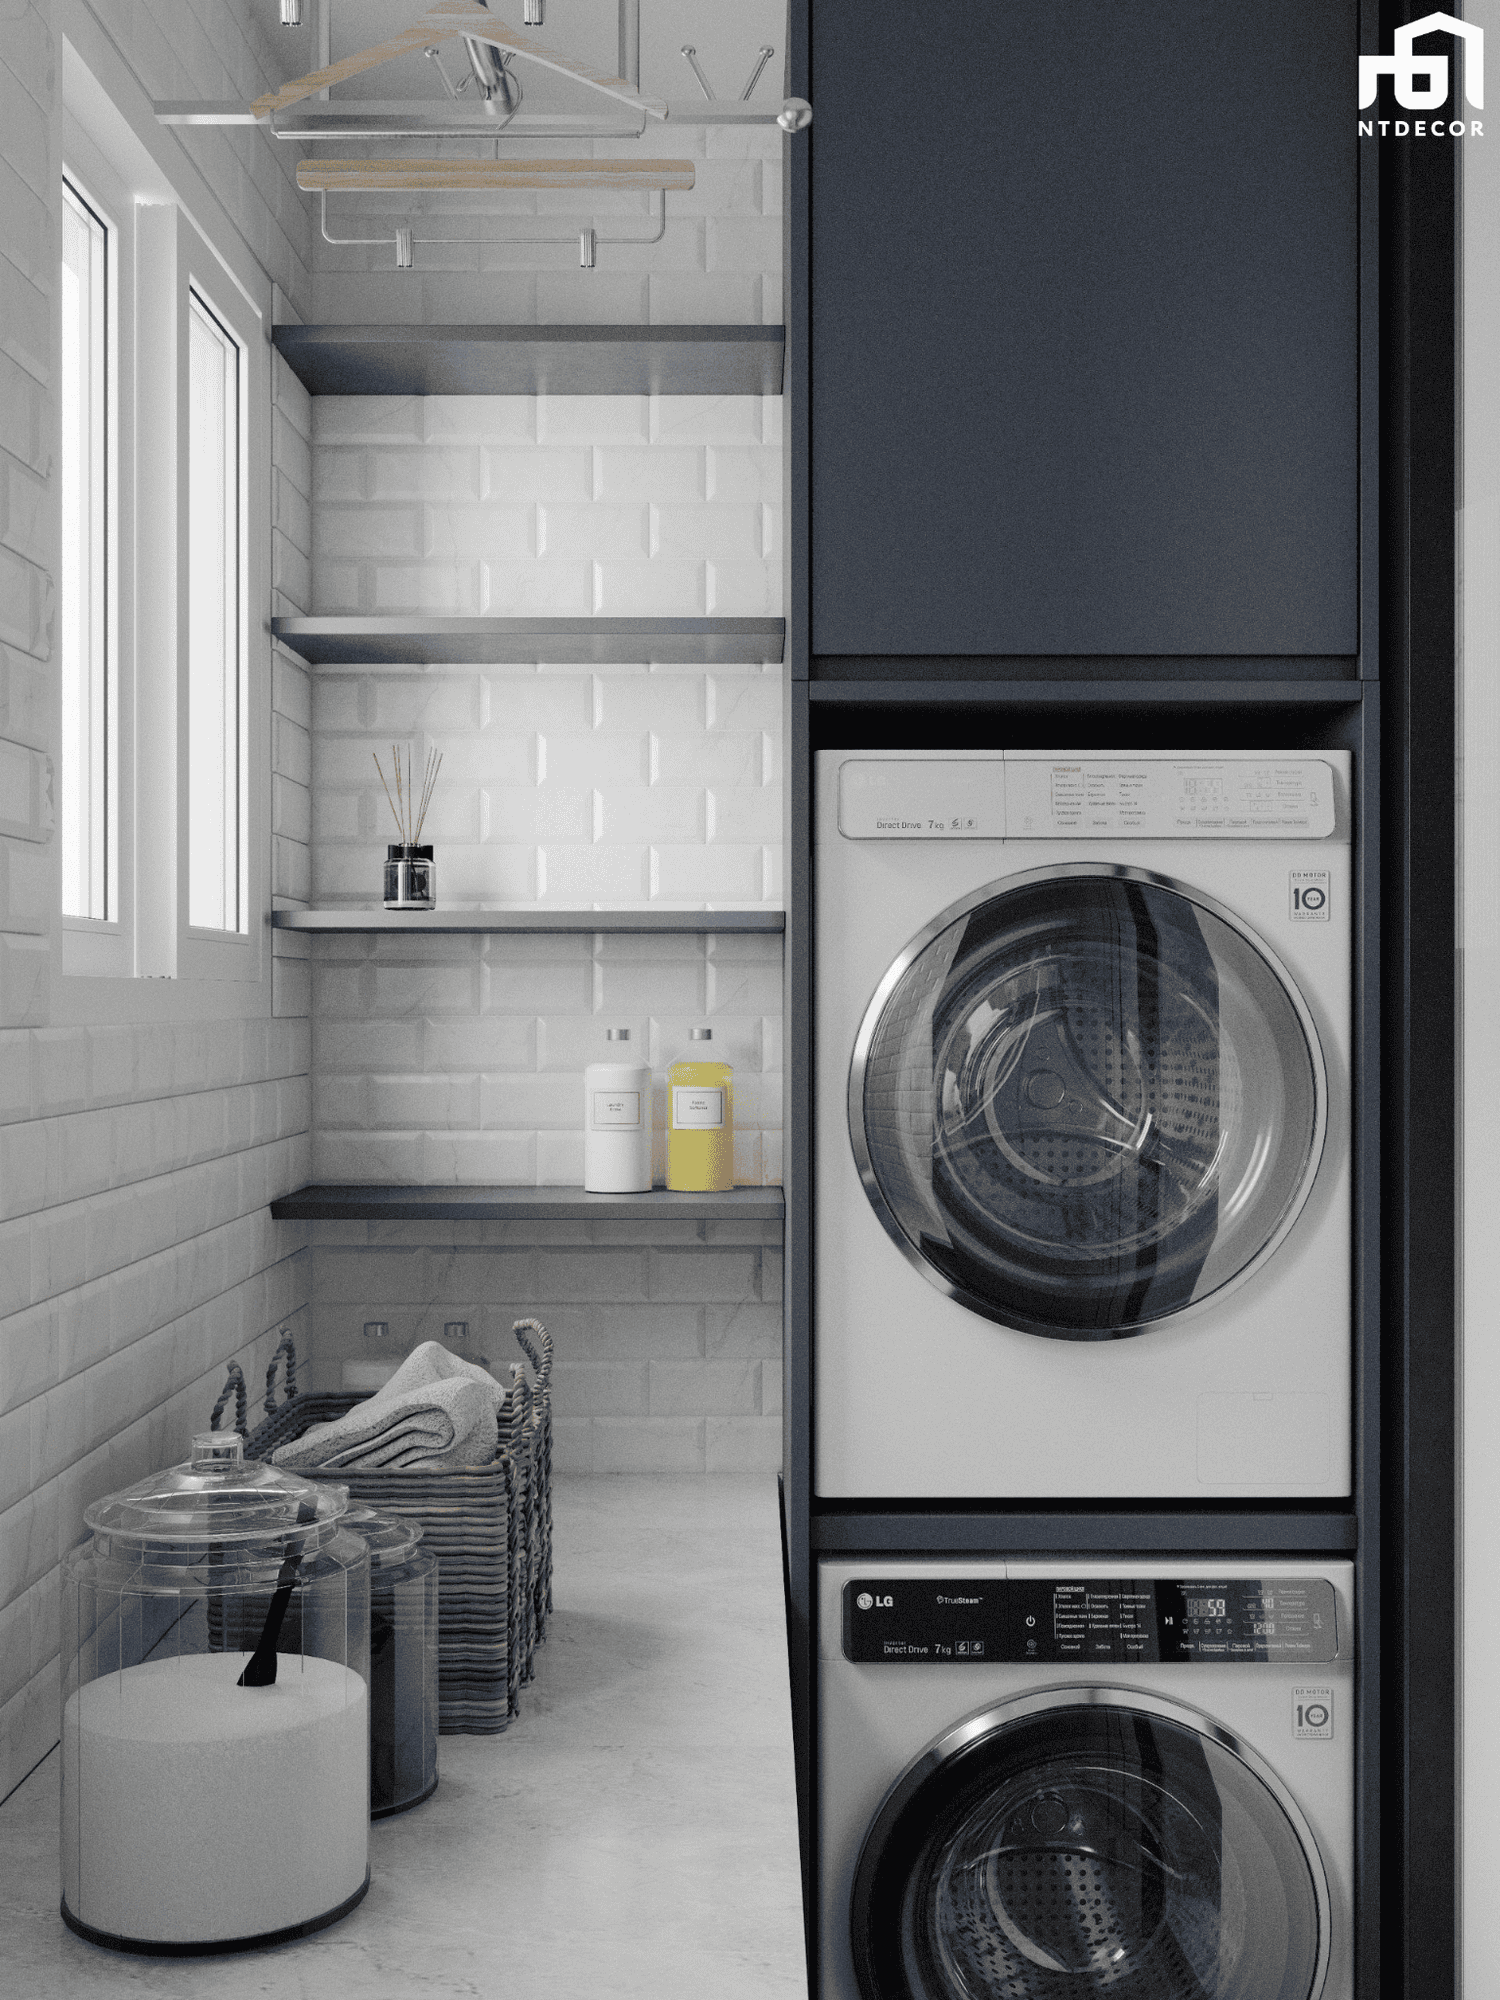 Laundry Room 3D Design of Xi Riverview Palace Interior Design Modern Style | NTDecor